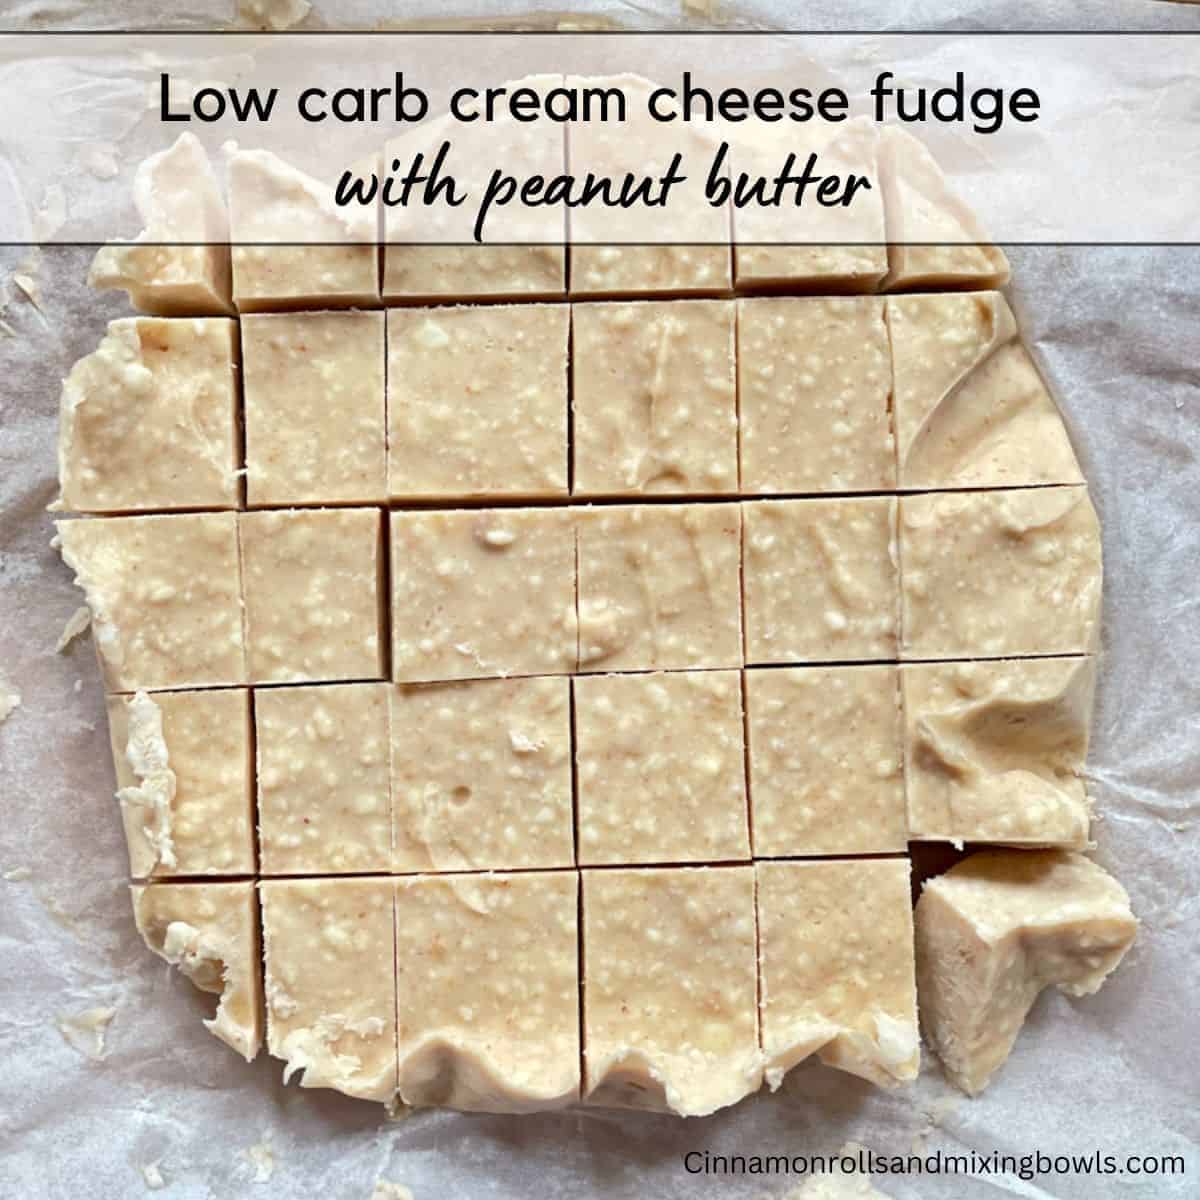 Low carb cream cheese fudge with peanut butter